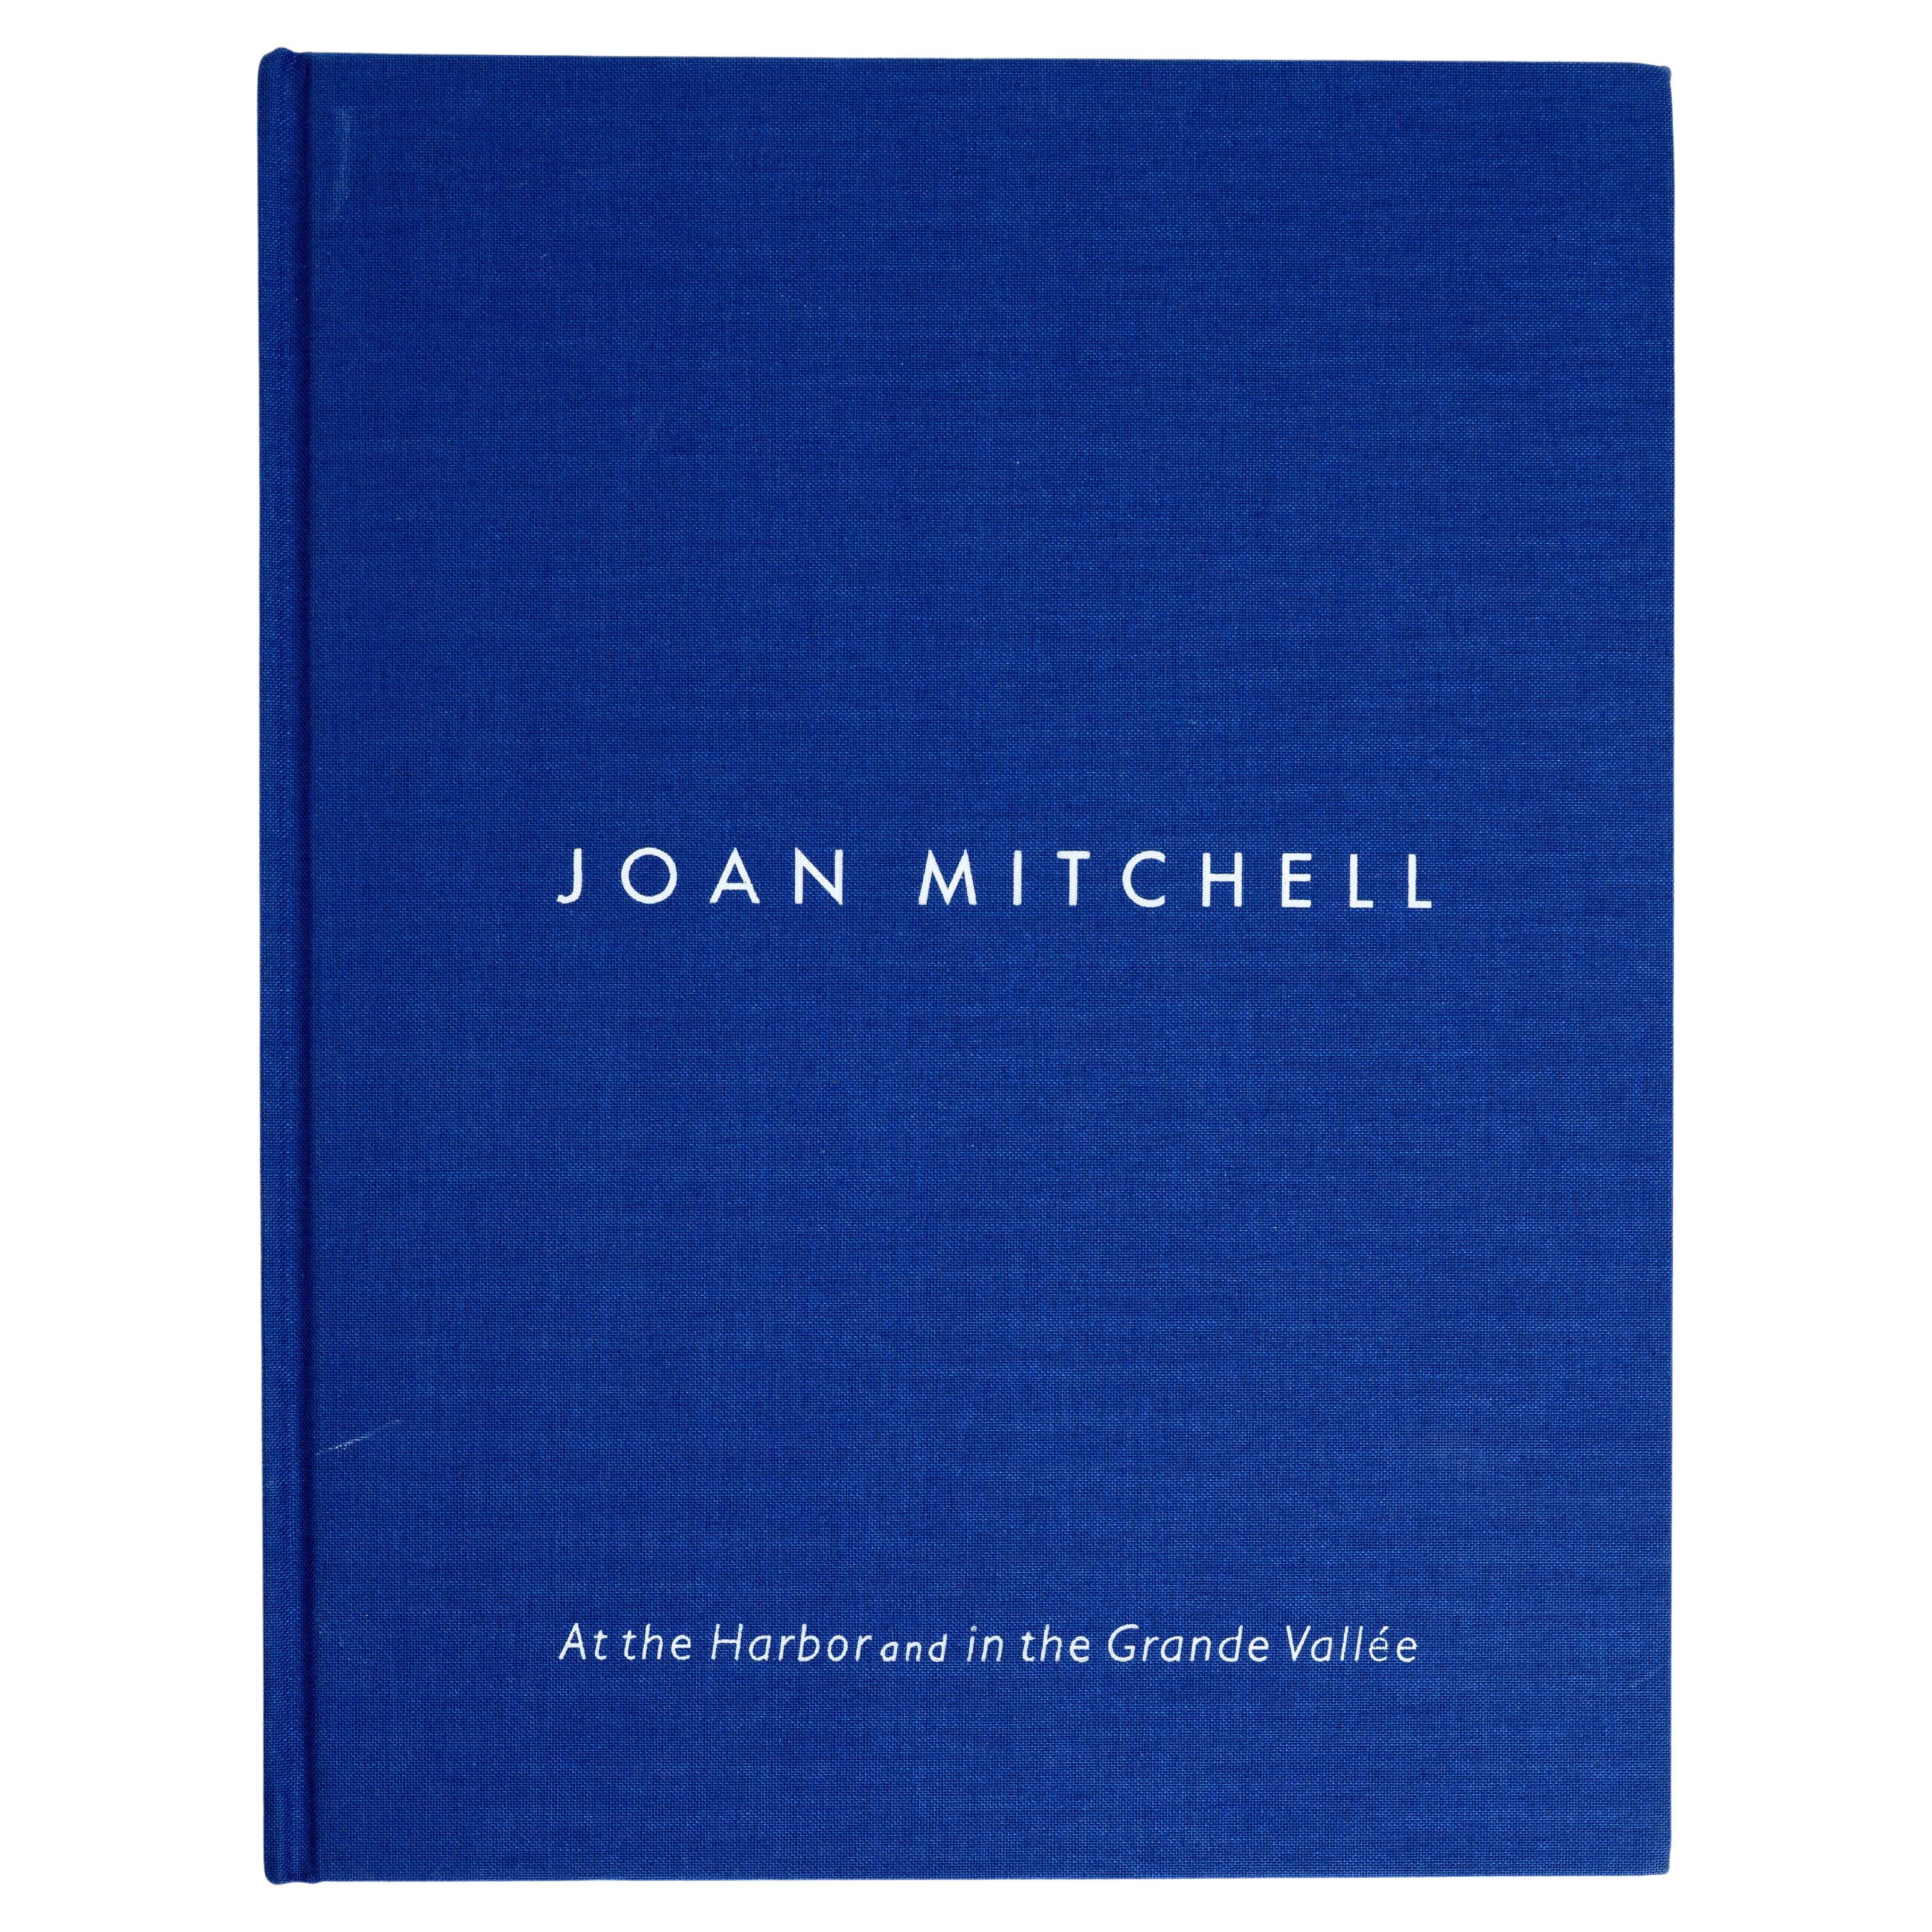 Joan Mitchell: At the Harbor and in the Grande Vallée 10/29-12/18, 2015, 1st Ed